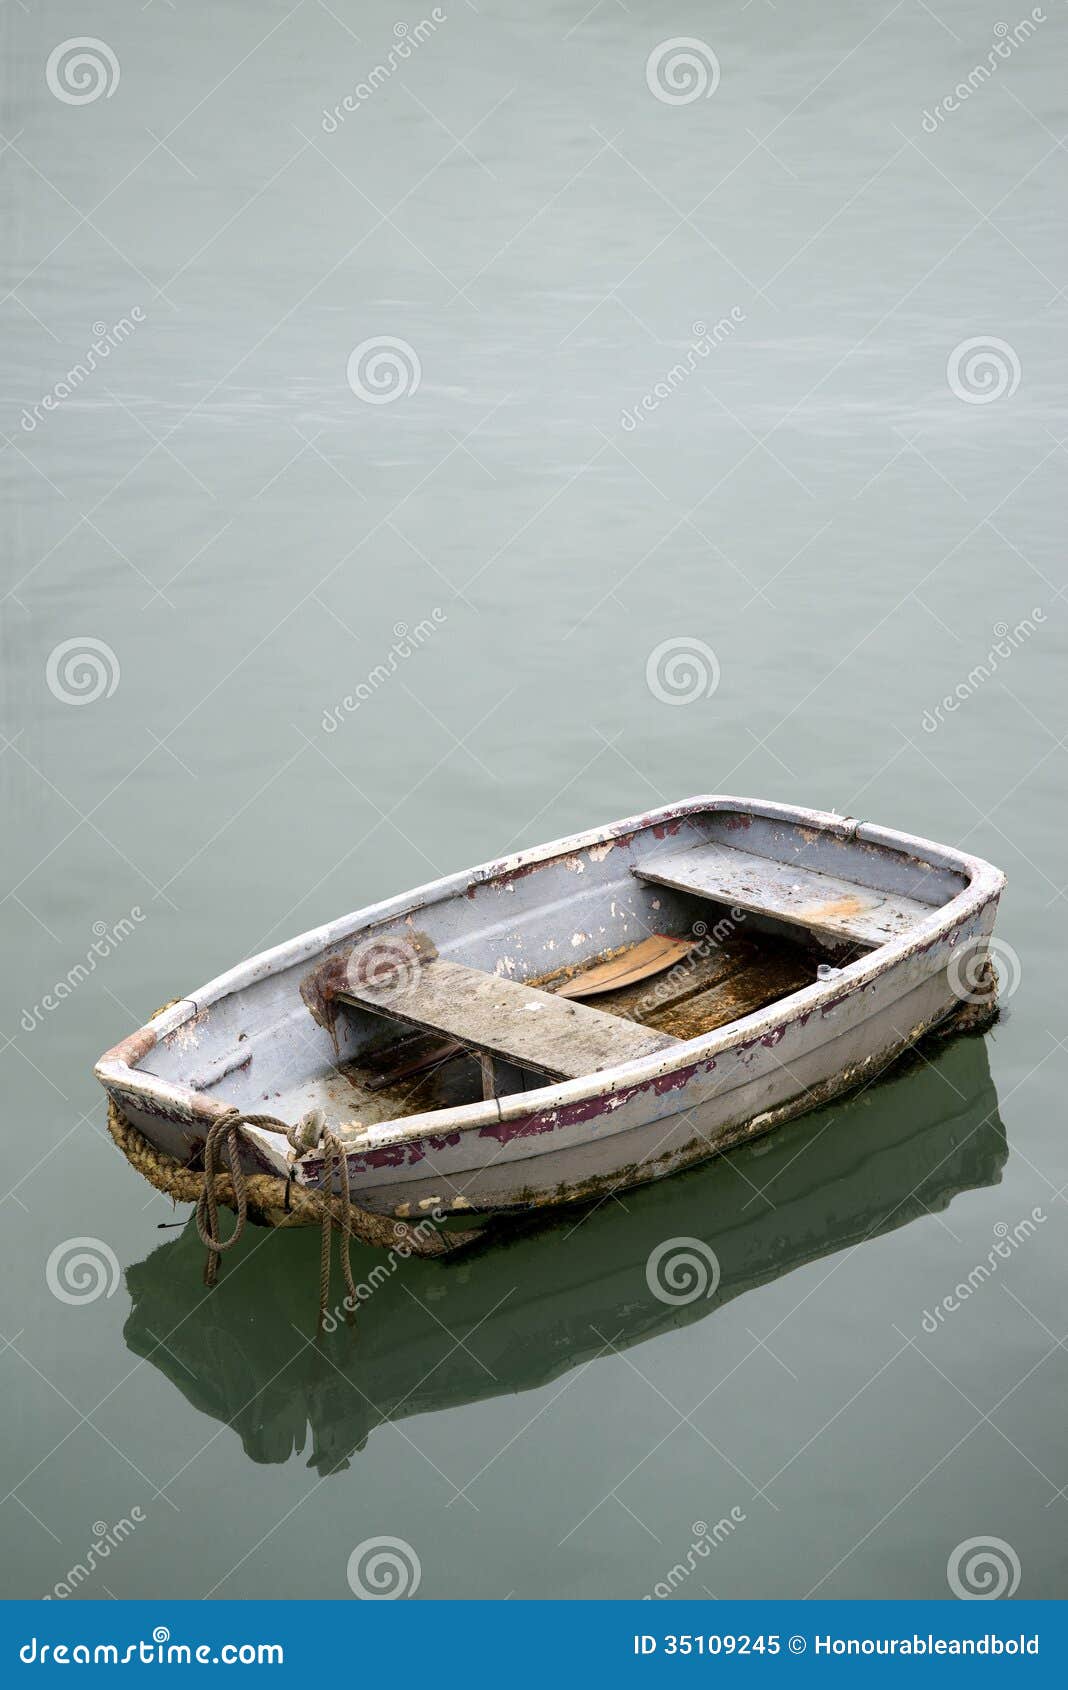 Neglected Old Rowing Boat On Calm Sea Water Royalty Free Stock Photo 